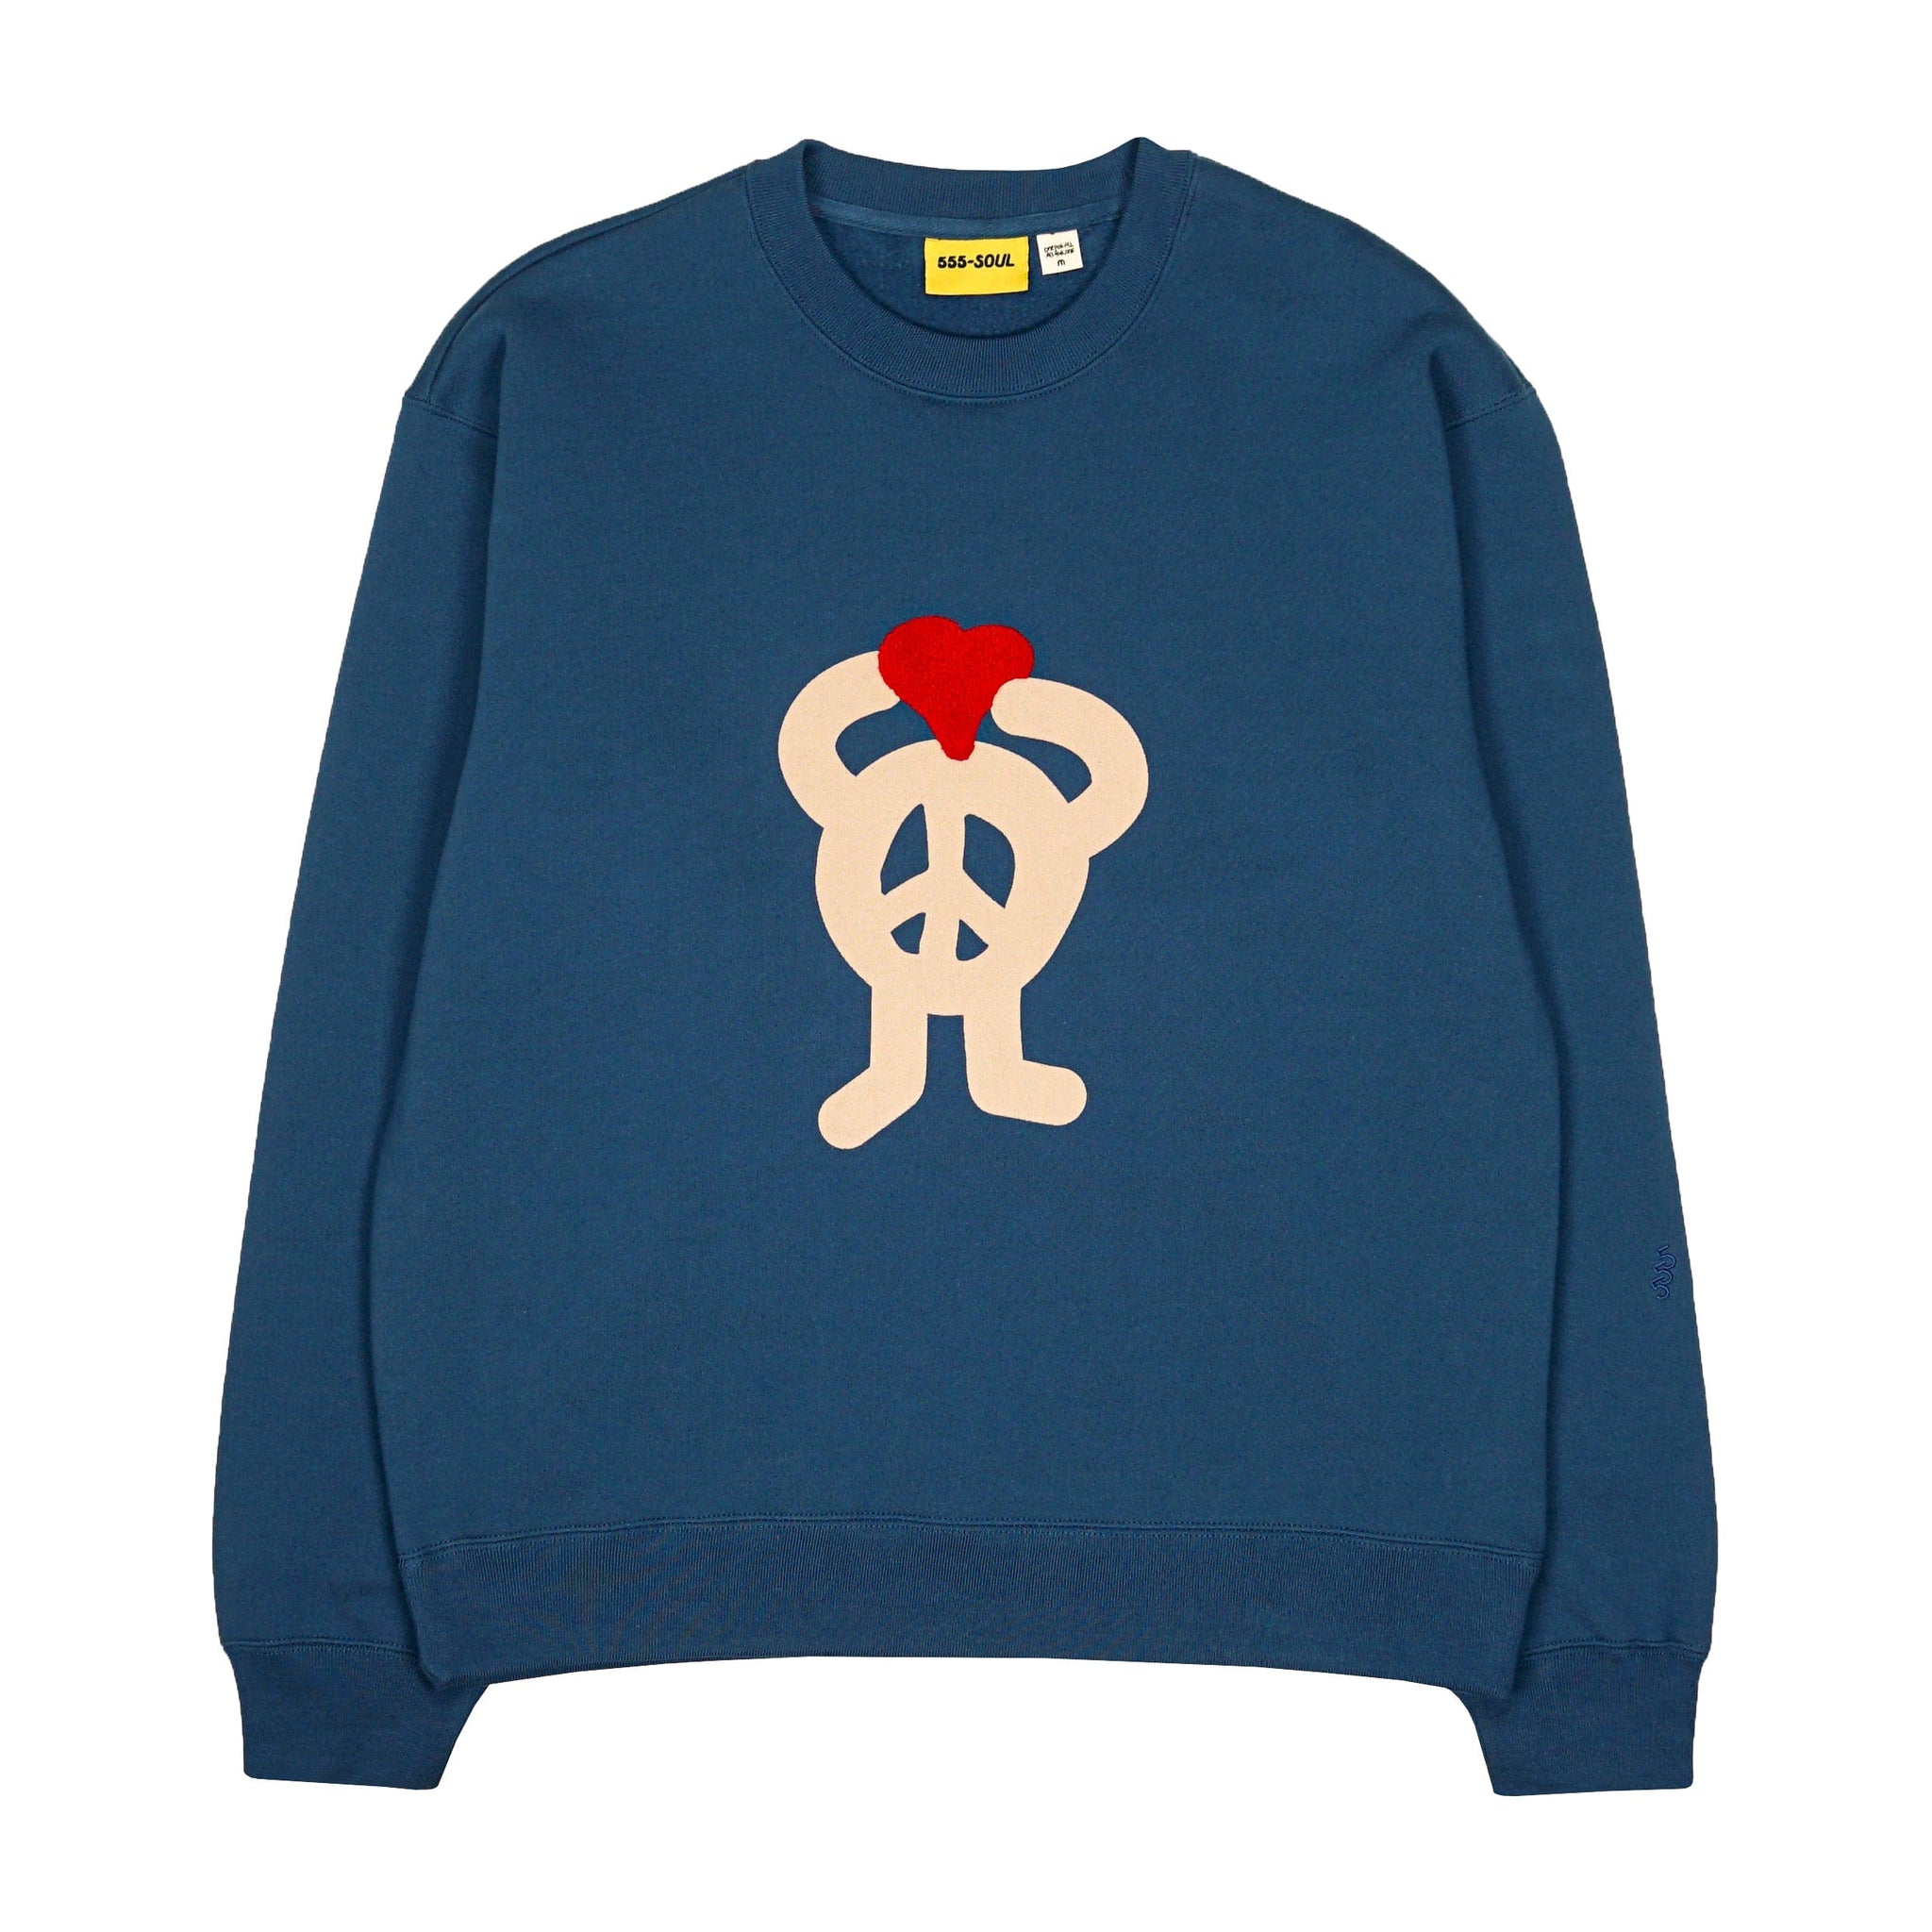 Peace and Love Crewneck in navy